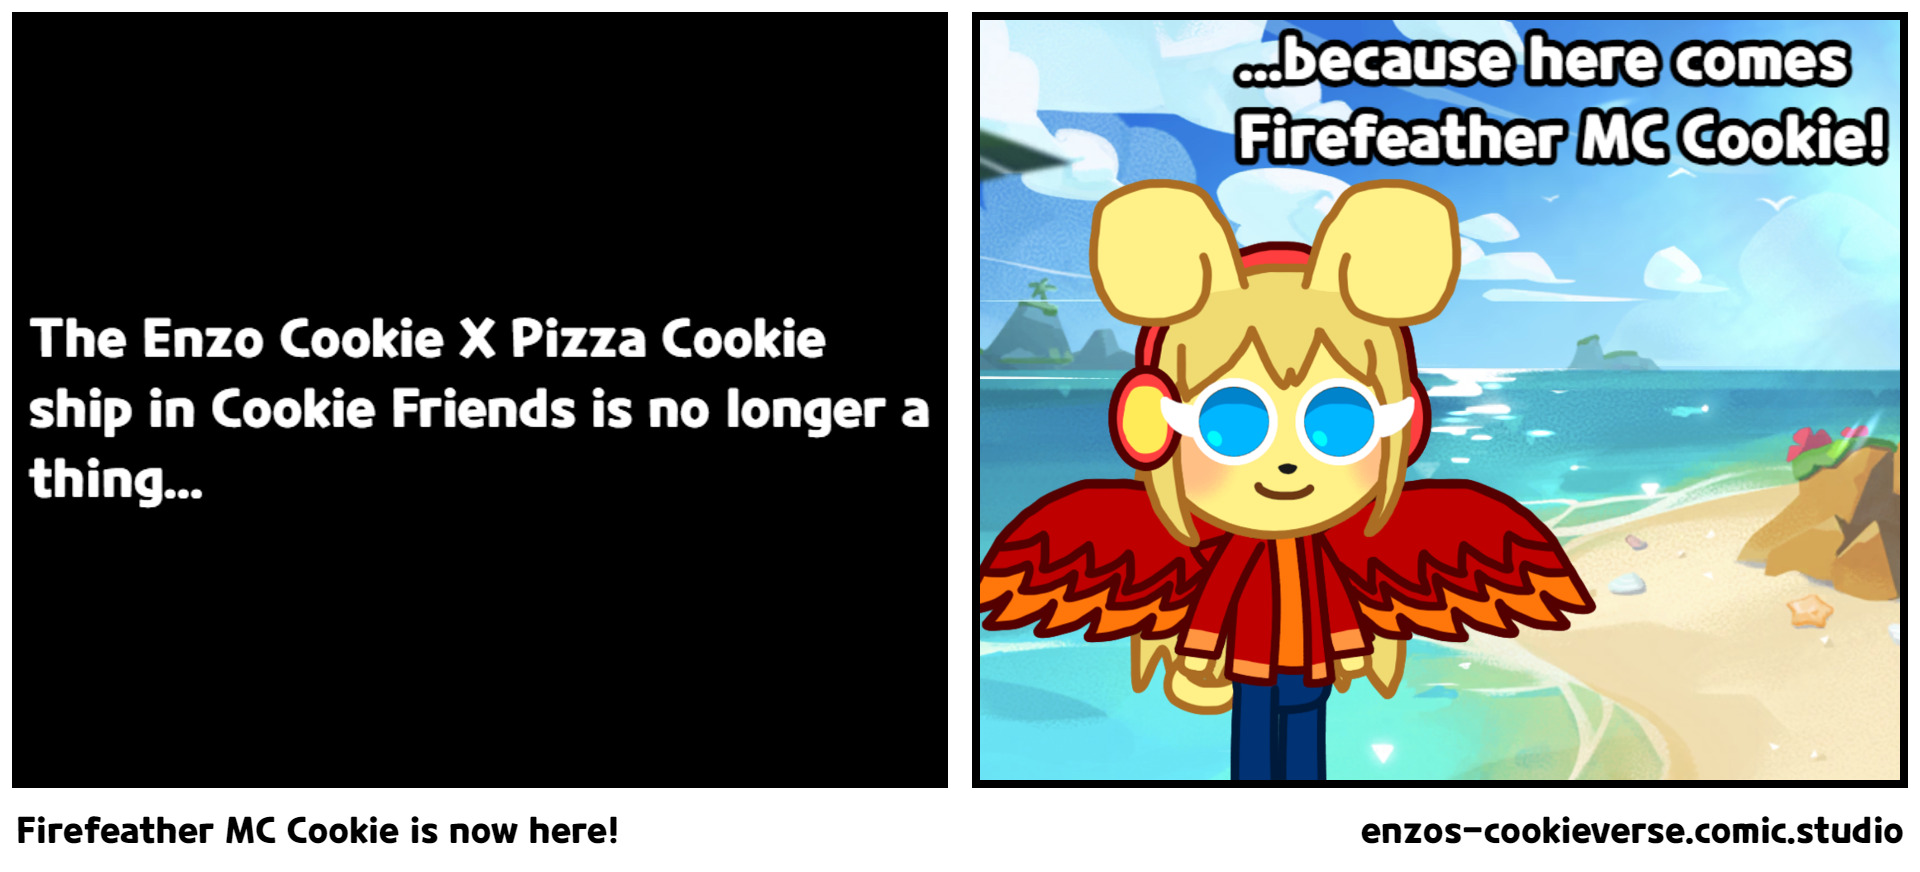 Firefeather MC Cookie is now here!